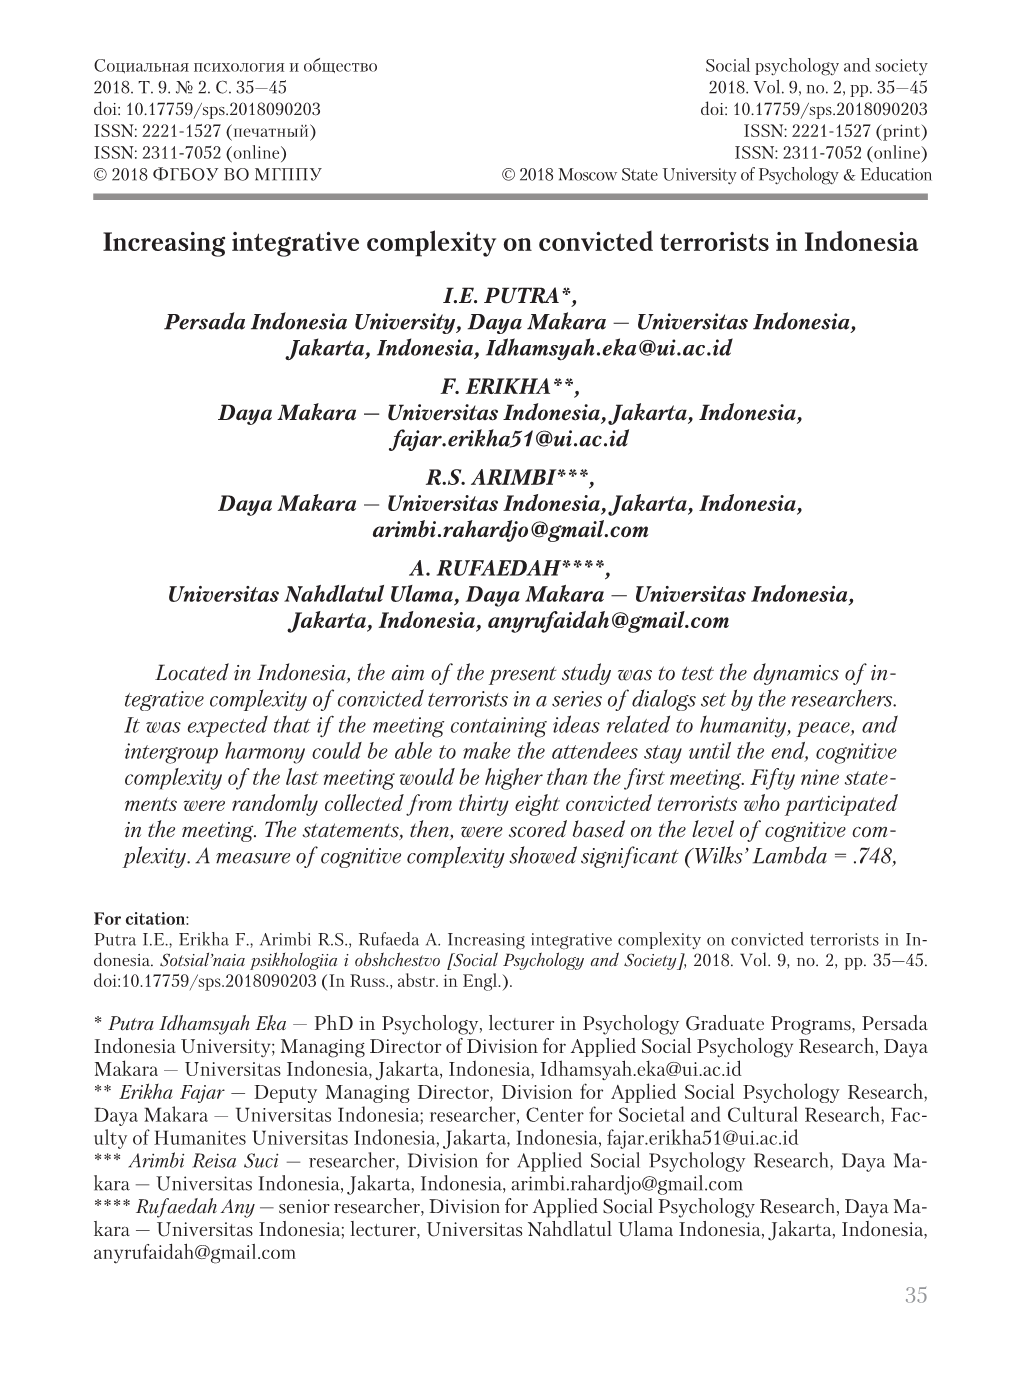 Increasing Integrative Complexity on Convicted Terrorists in Indonesia